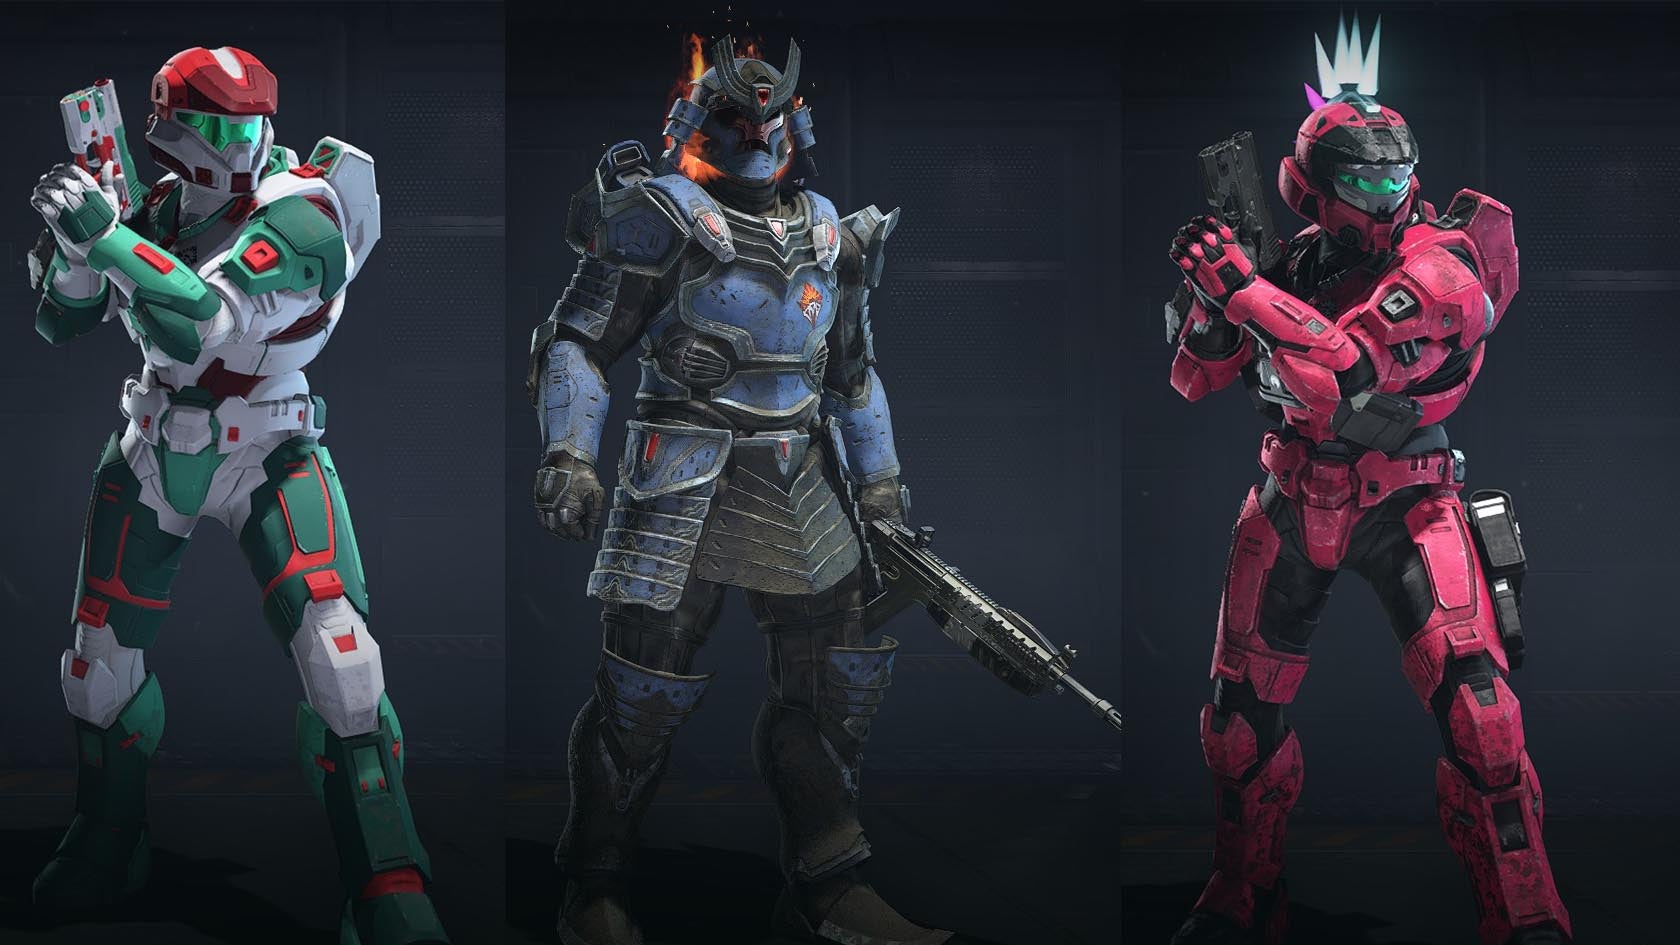 Brown Jr.'s lookbook, showing (from left) kits styled with rewards from the Winter Contingency, Fracture: Tenrai, and Cyber Showdown events. (Screenshot: 343 Industries / Romance Brown Jr.)